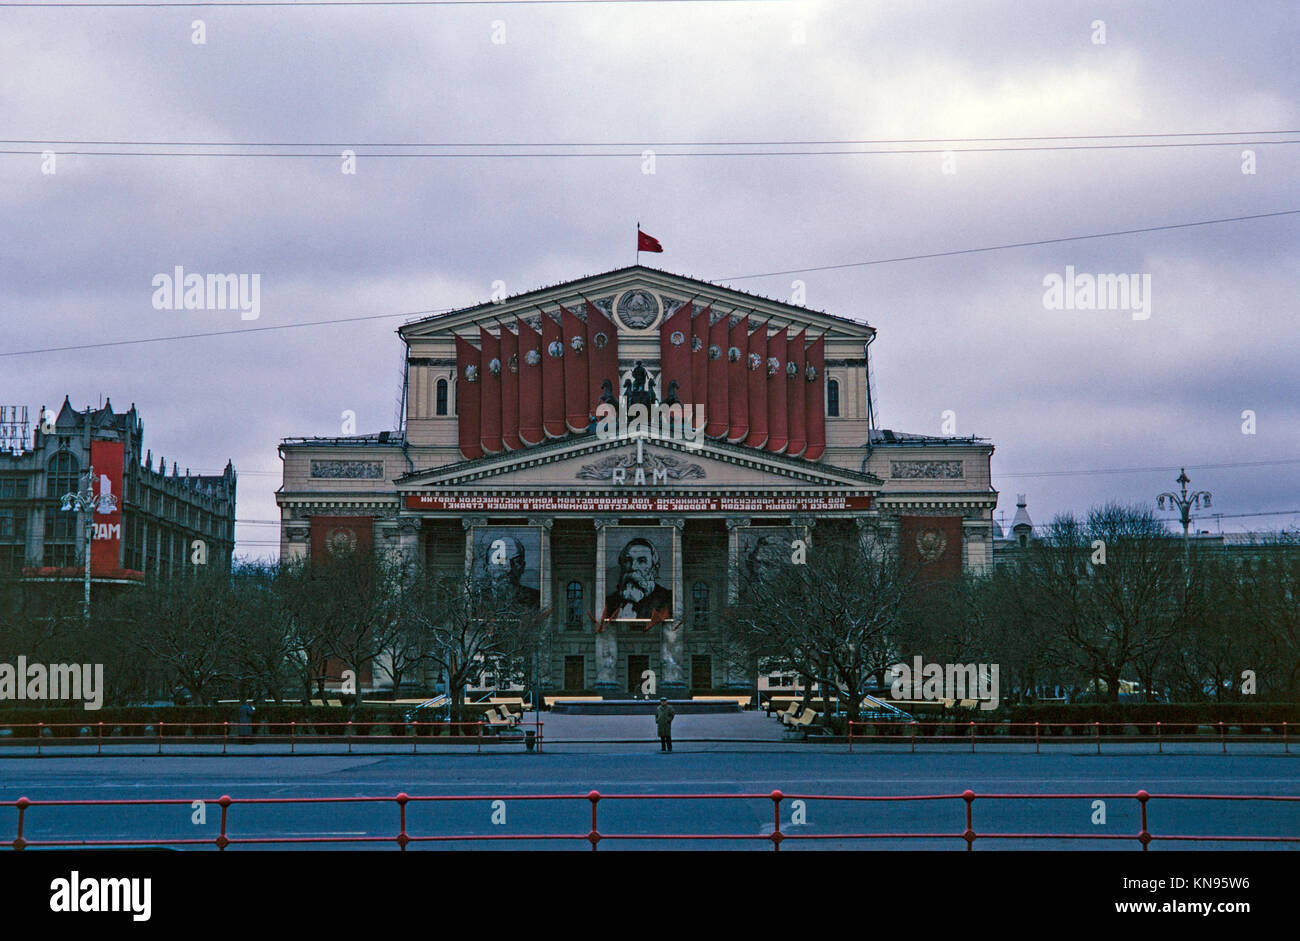 View of the Bolshoi Theatre in Moscow, Russia, taken in May 1969.The Bolshoi Theatre (Russian: Большо́й теа́тр, tr. Bol'shoy Teatr, Big Theatre, IPA: [bɐlʲˈʂoj tʲɪˈatər]) is a historic theatre in Moscow, Russia, designed by architect Joseph Bové, which holds ballet and opera performances. Before the October Revolution it was a part of the Imperial Theatres of the Russian Empire along with Maly Theatre (Small Theatre) in Moscow and a few theatres in Saint Petersburg (Hermitage Theatre, Bolshoi (Kamenny) Theatre, later Mariinsky Theatre and others). Stock Photo